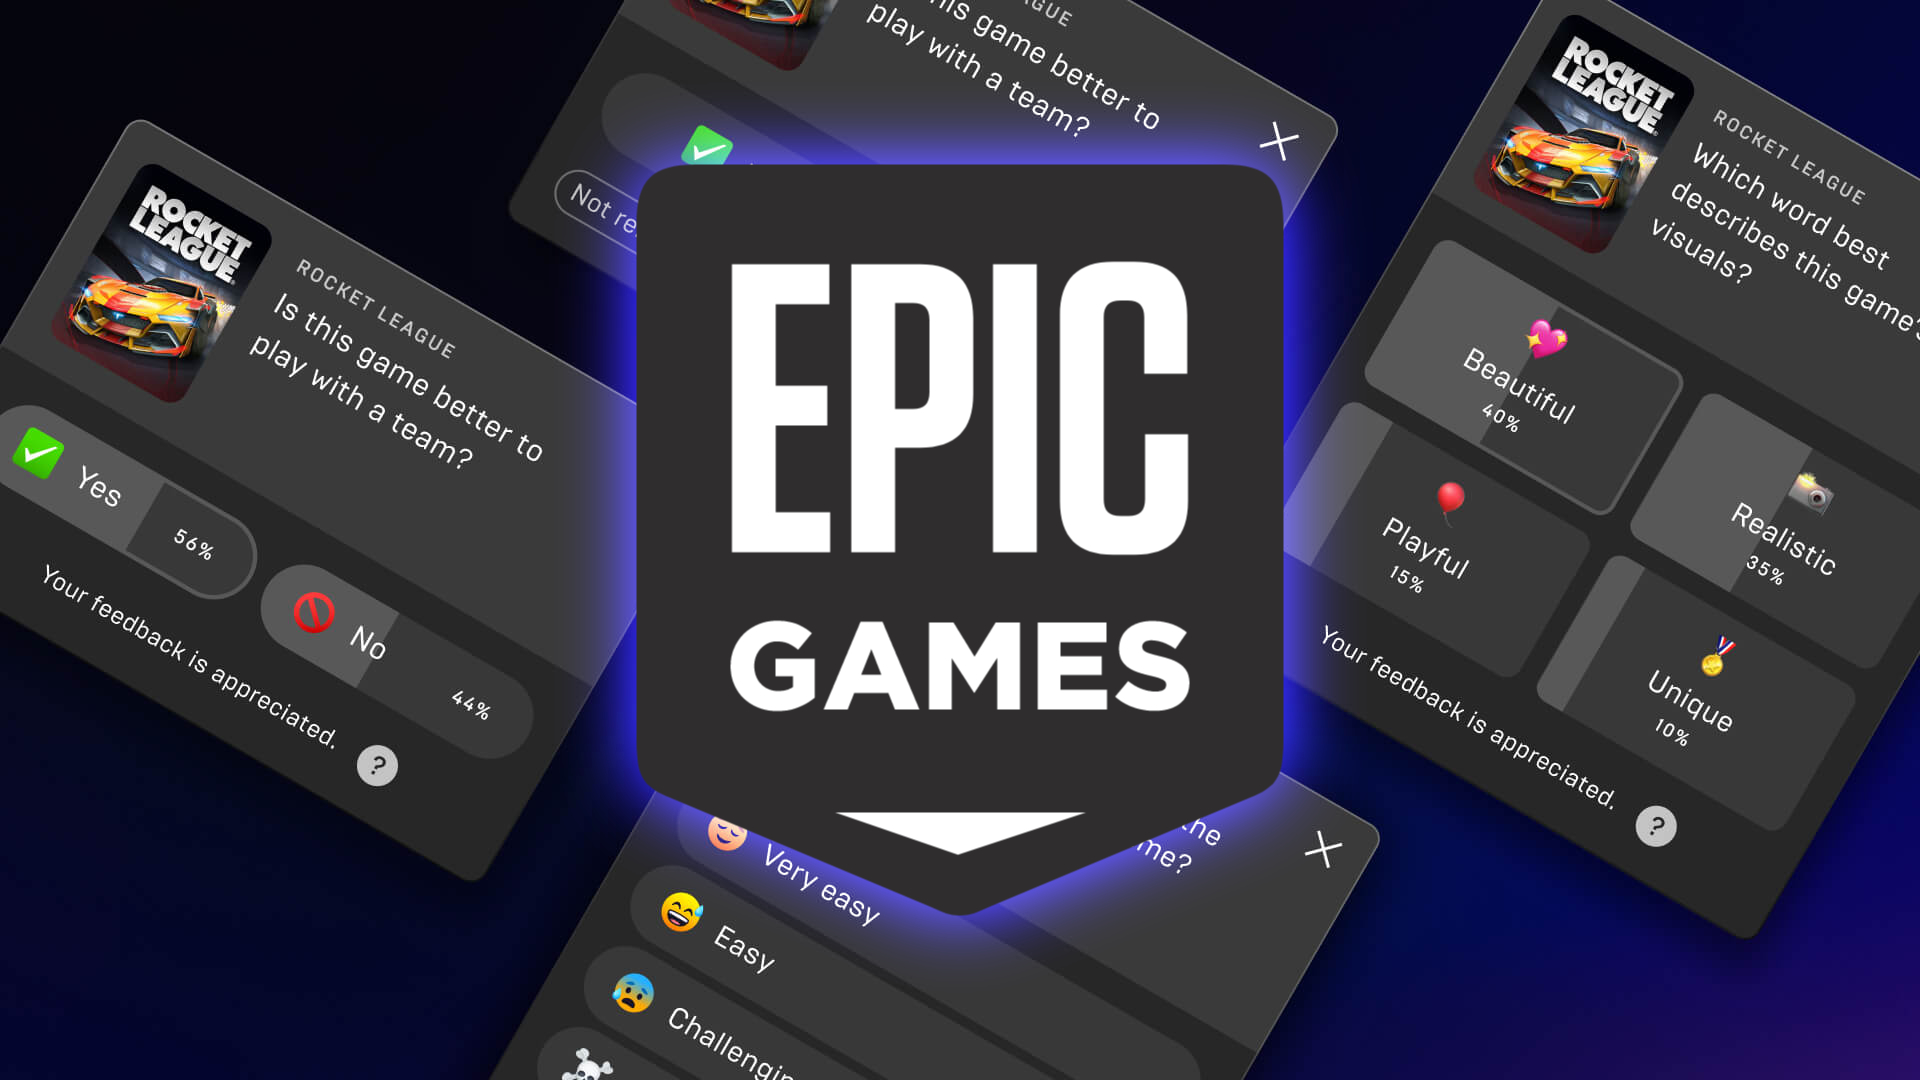 Epic Games Store Social Update - Epic Games Store